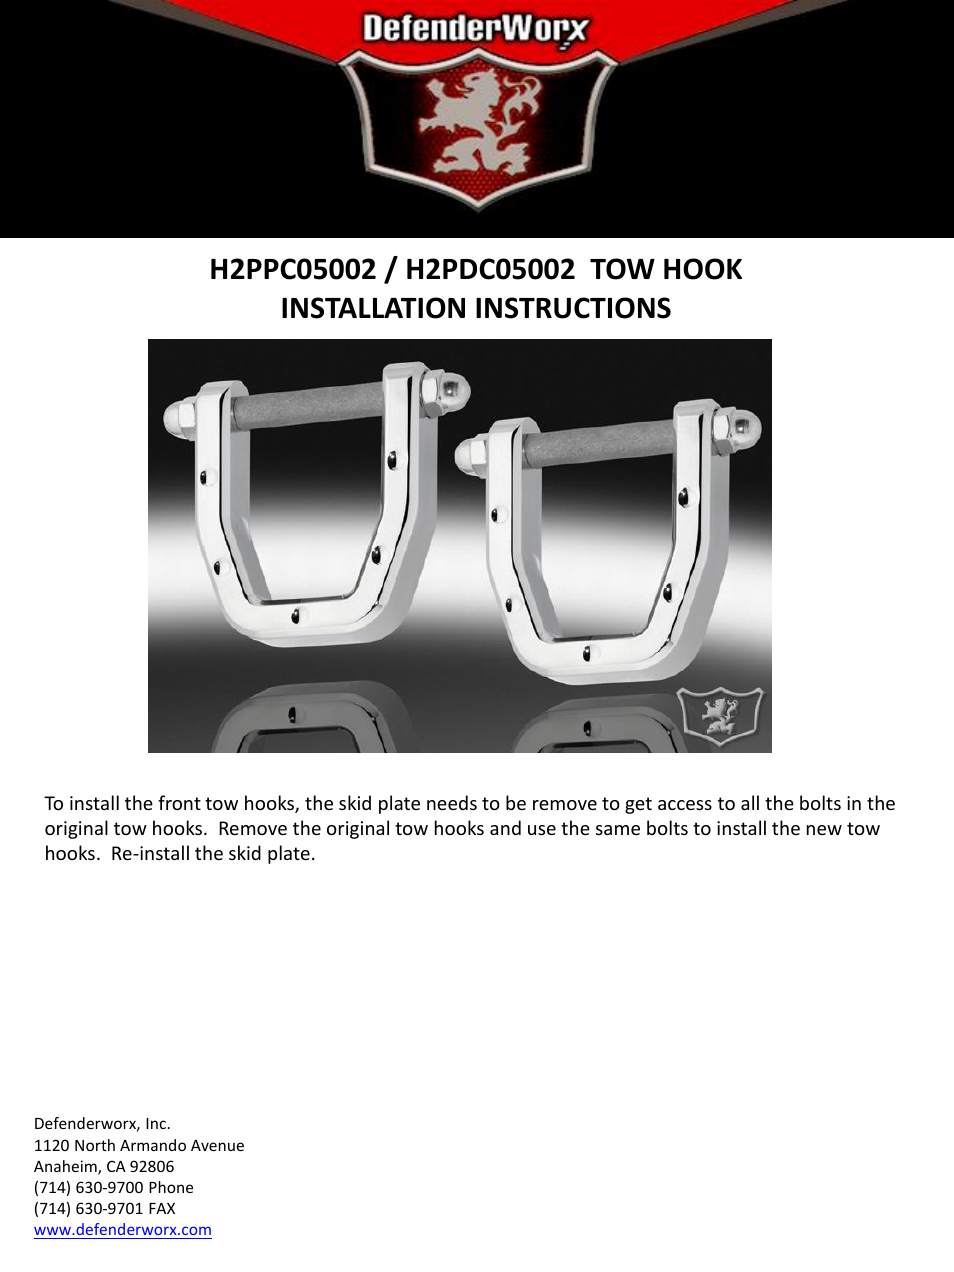 H2 TOW HOOKS